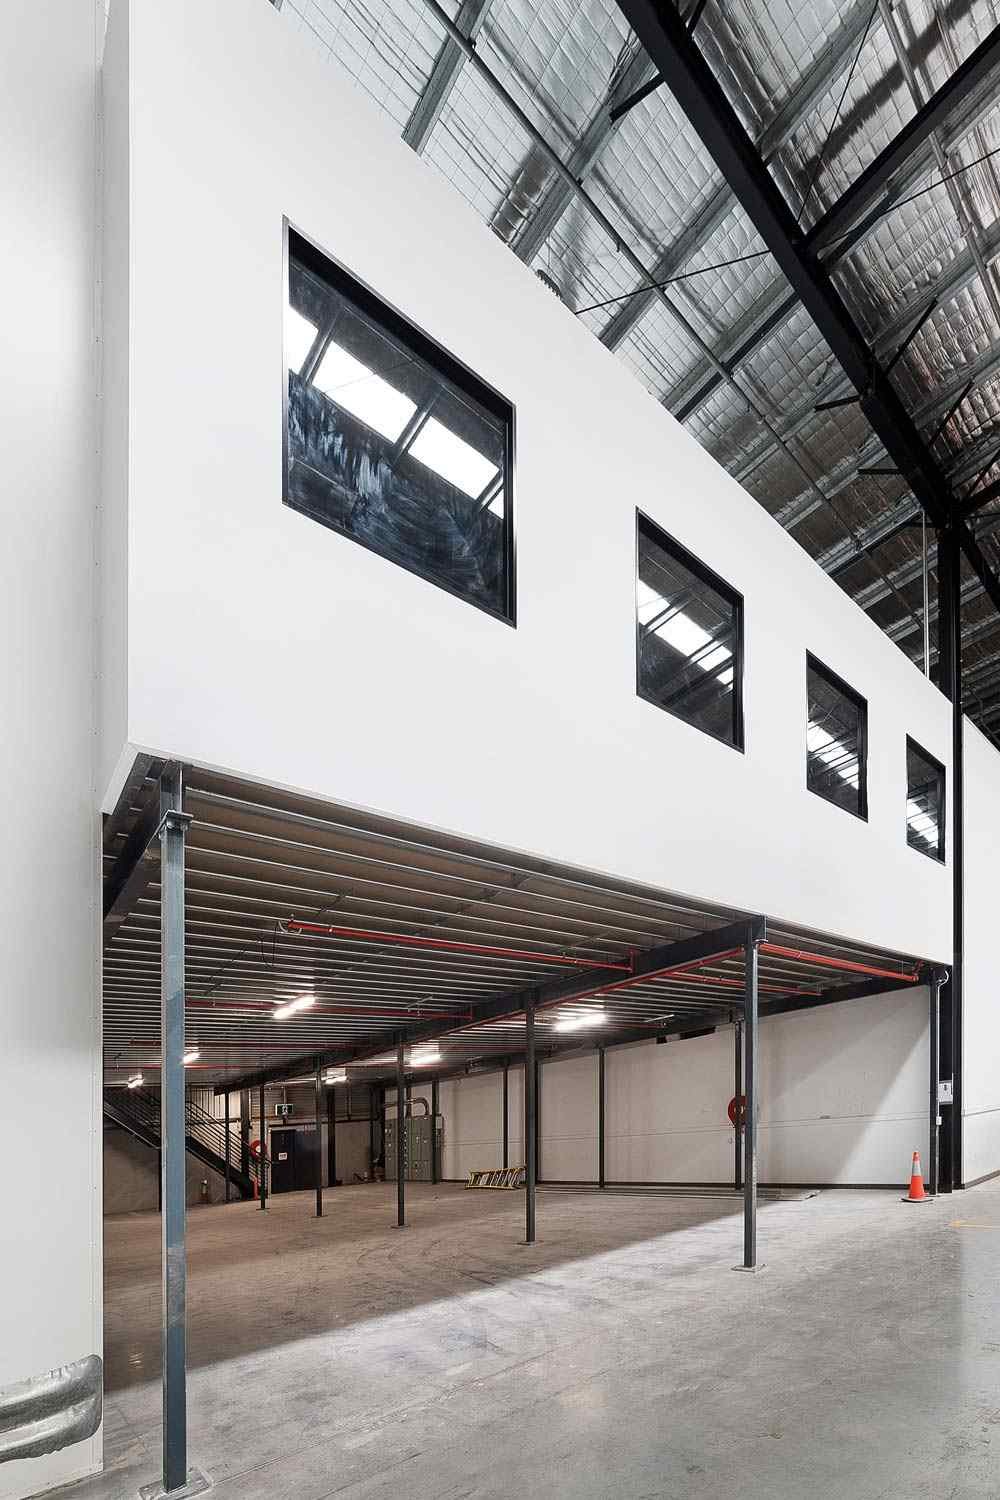 Is Mezzanine Racking the Right Storage Solution for Your Warehouse?